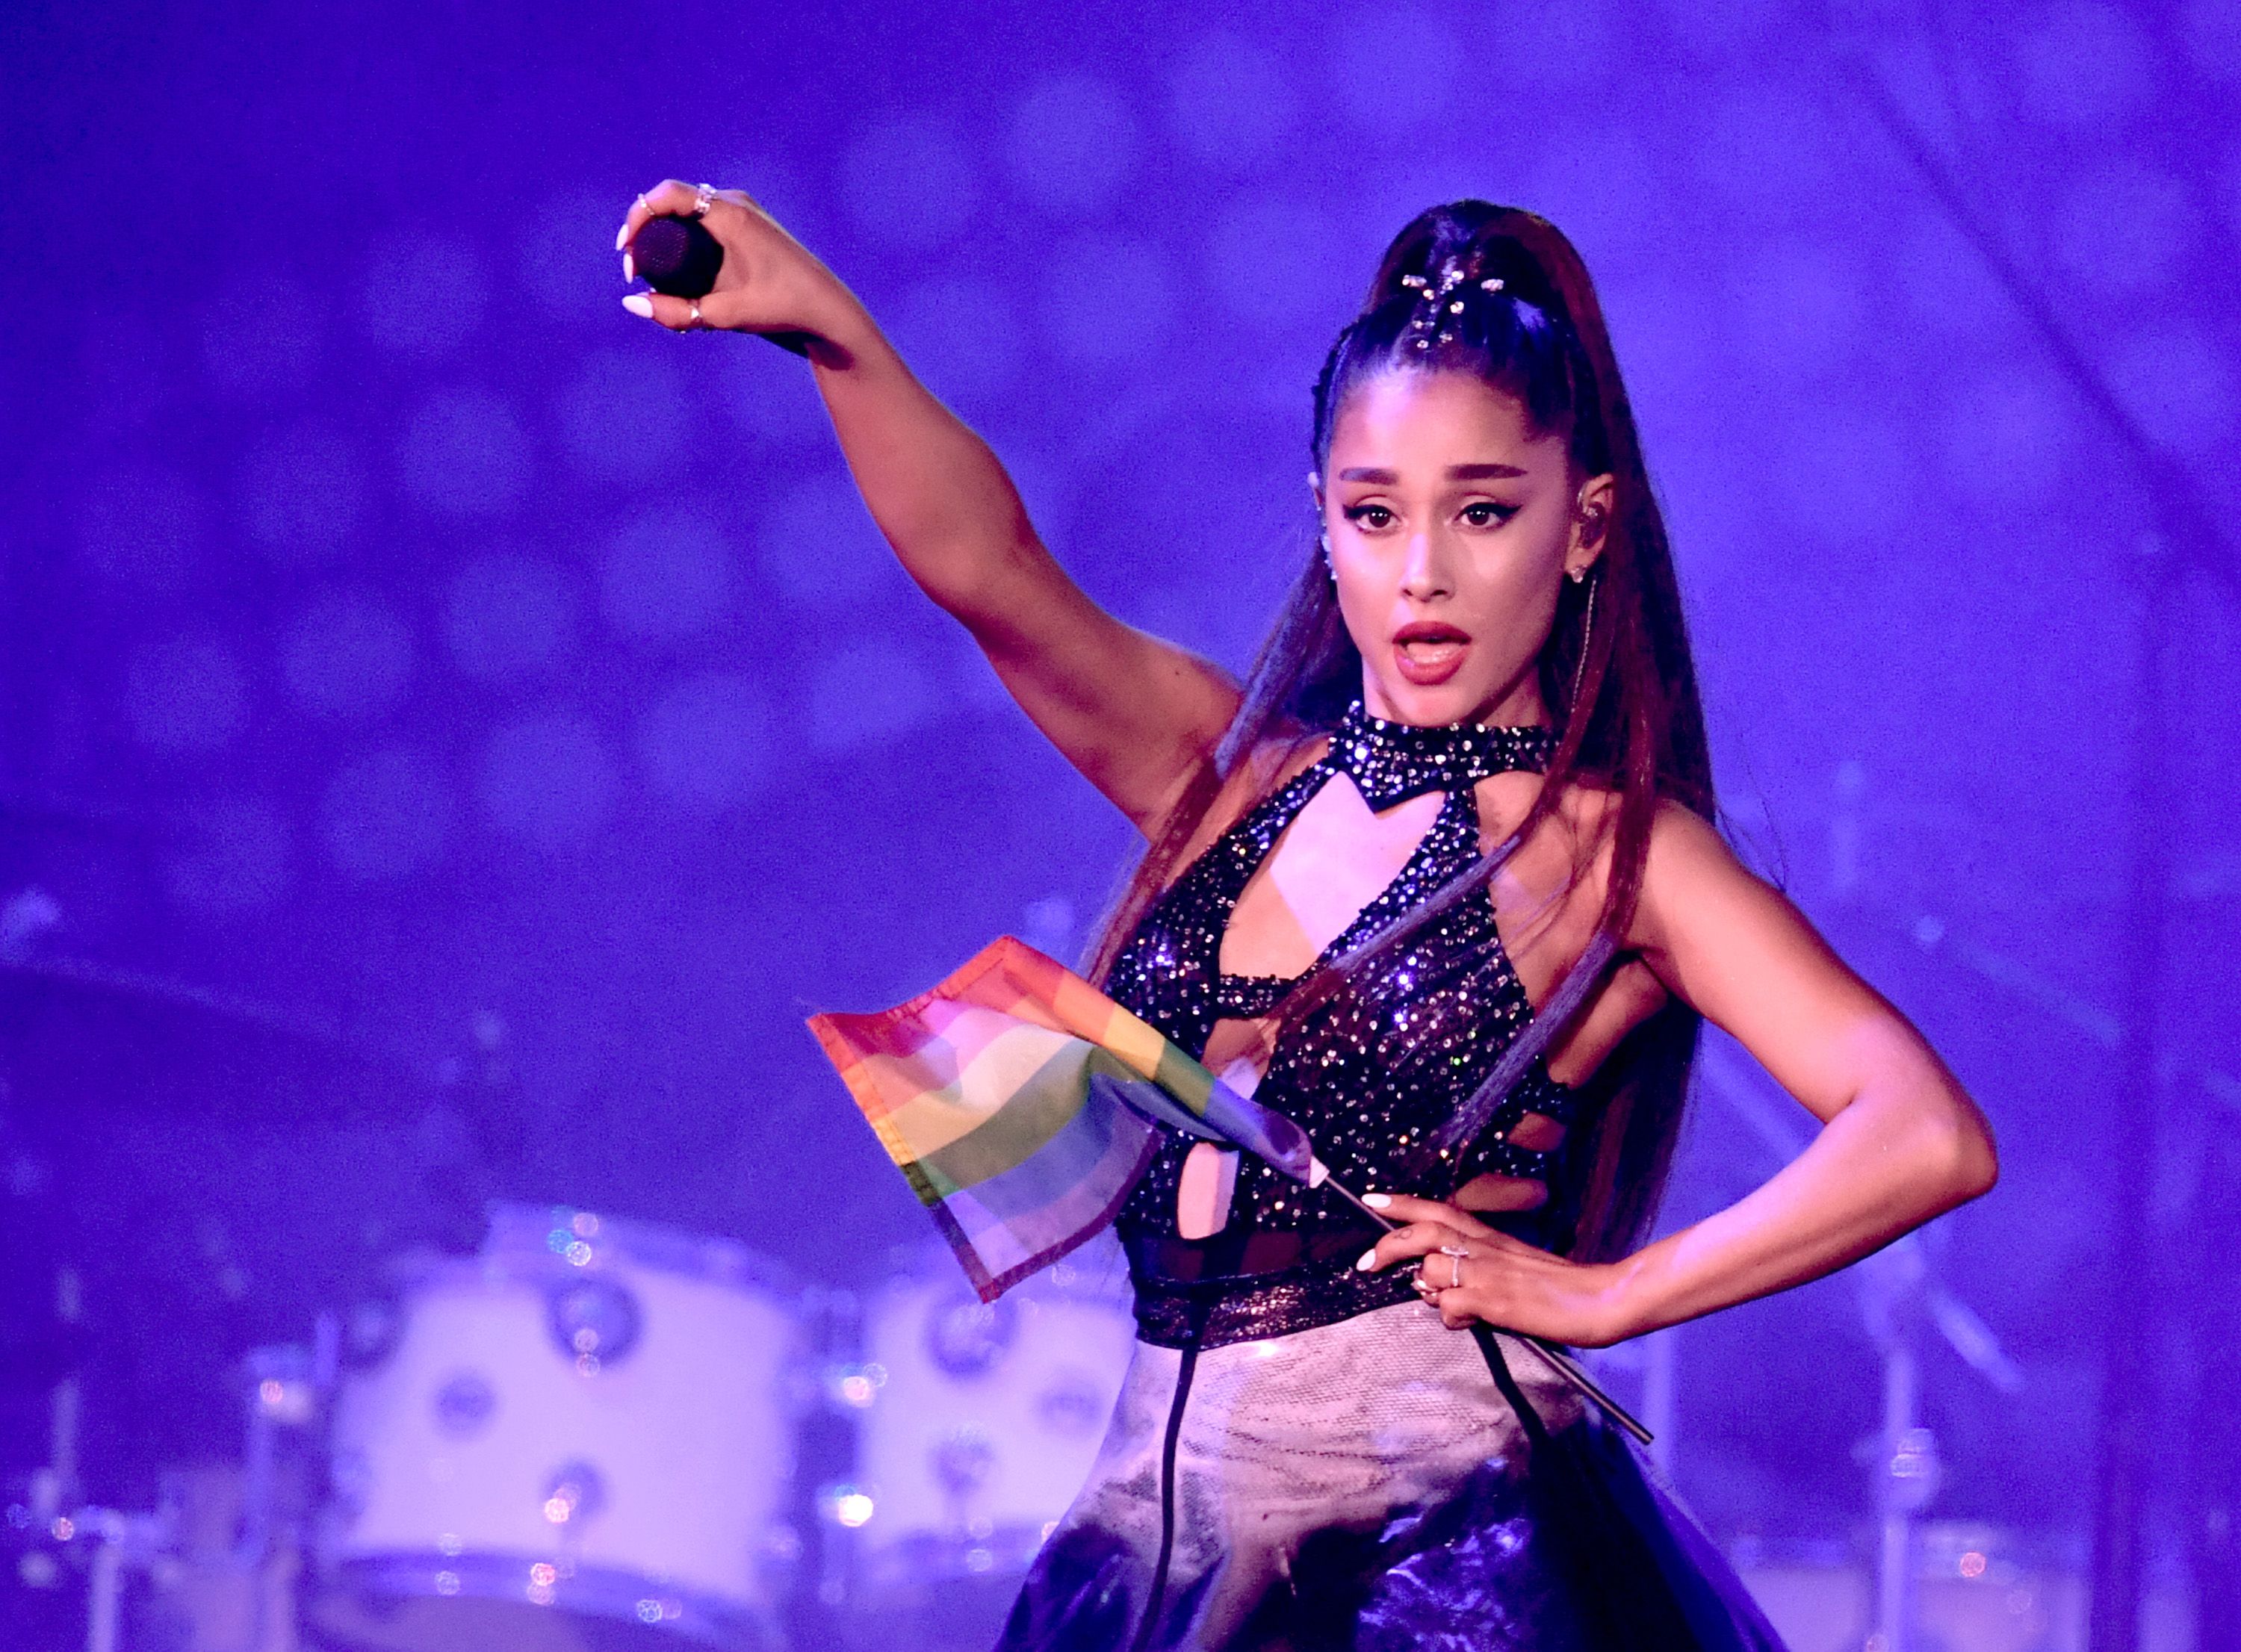 Ariana Grande starred in which Nickelodeon TV series?